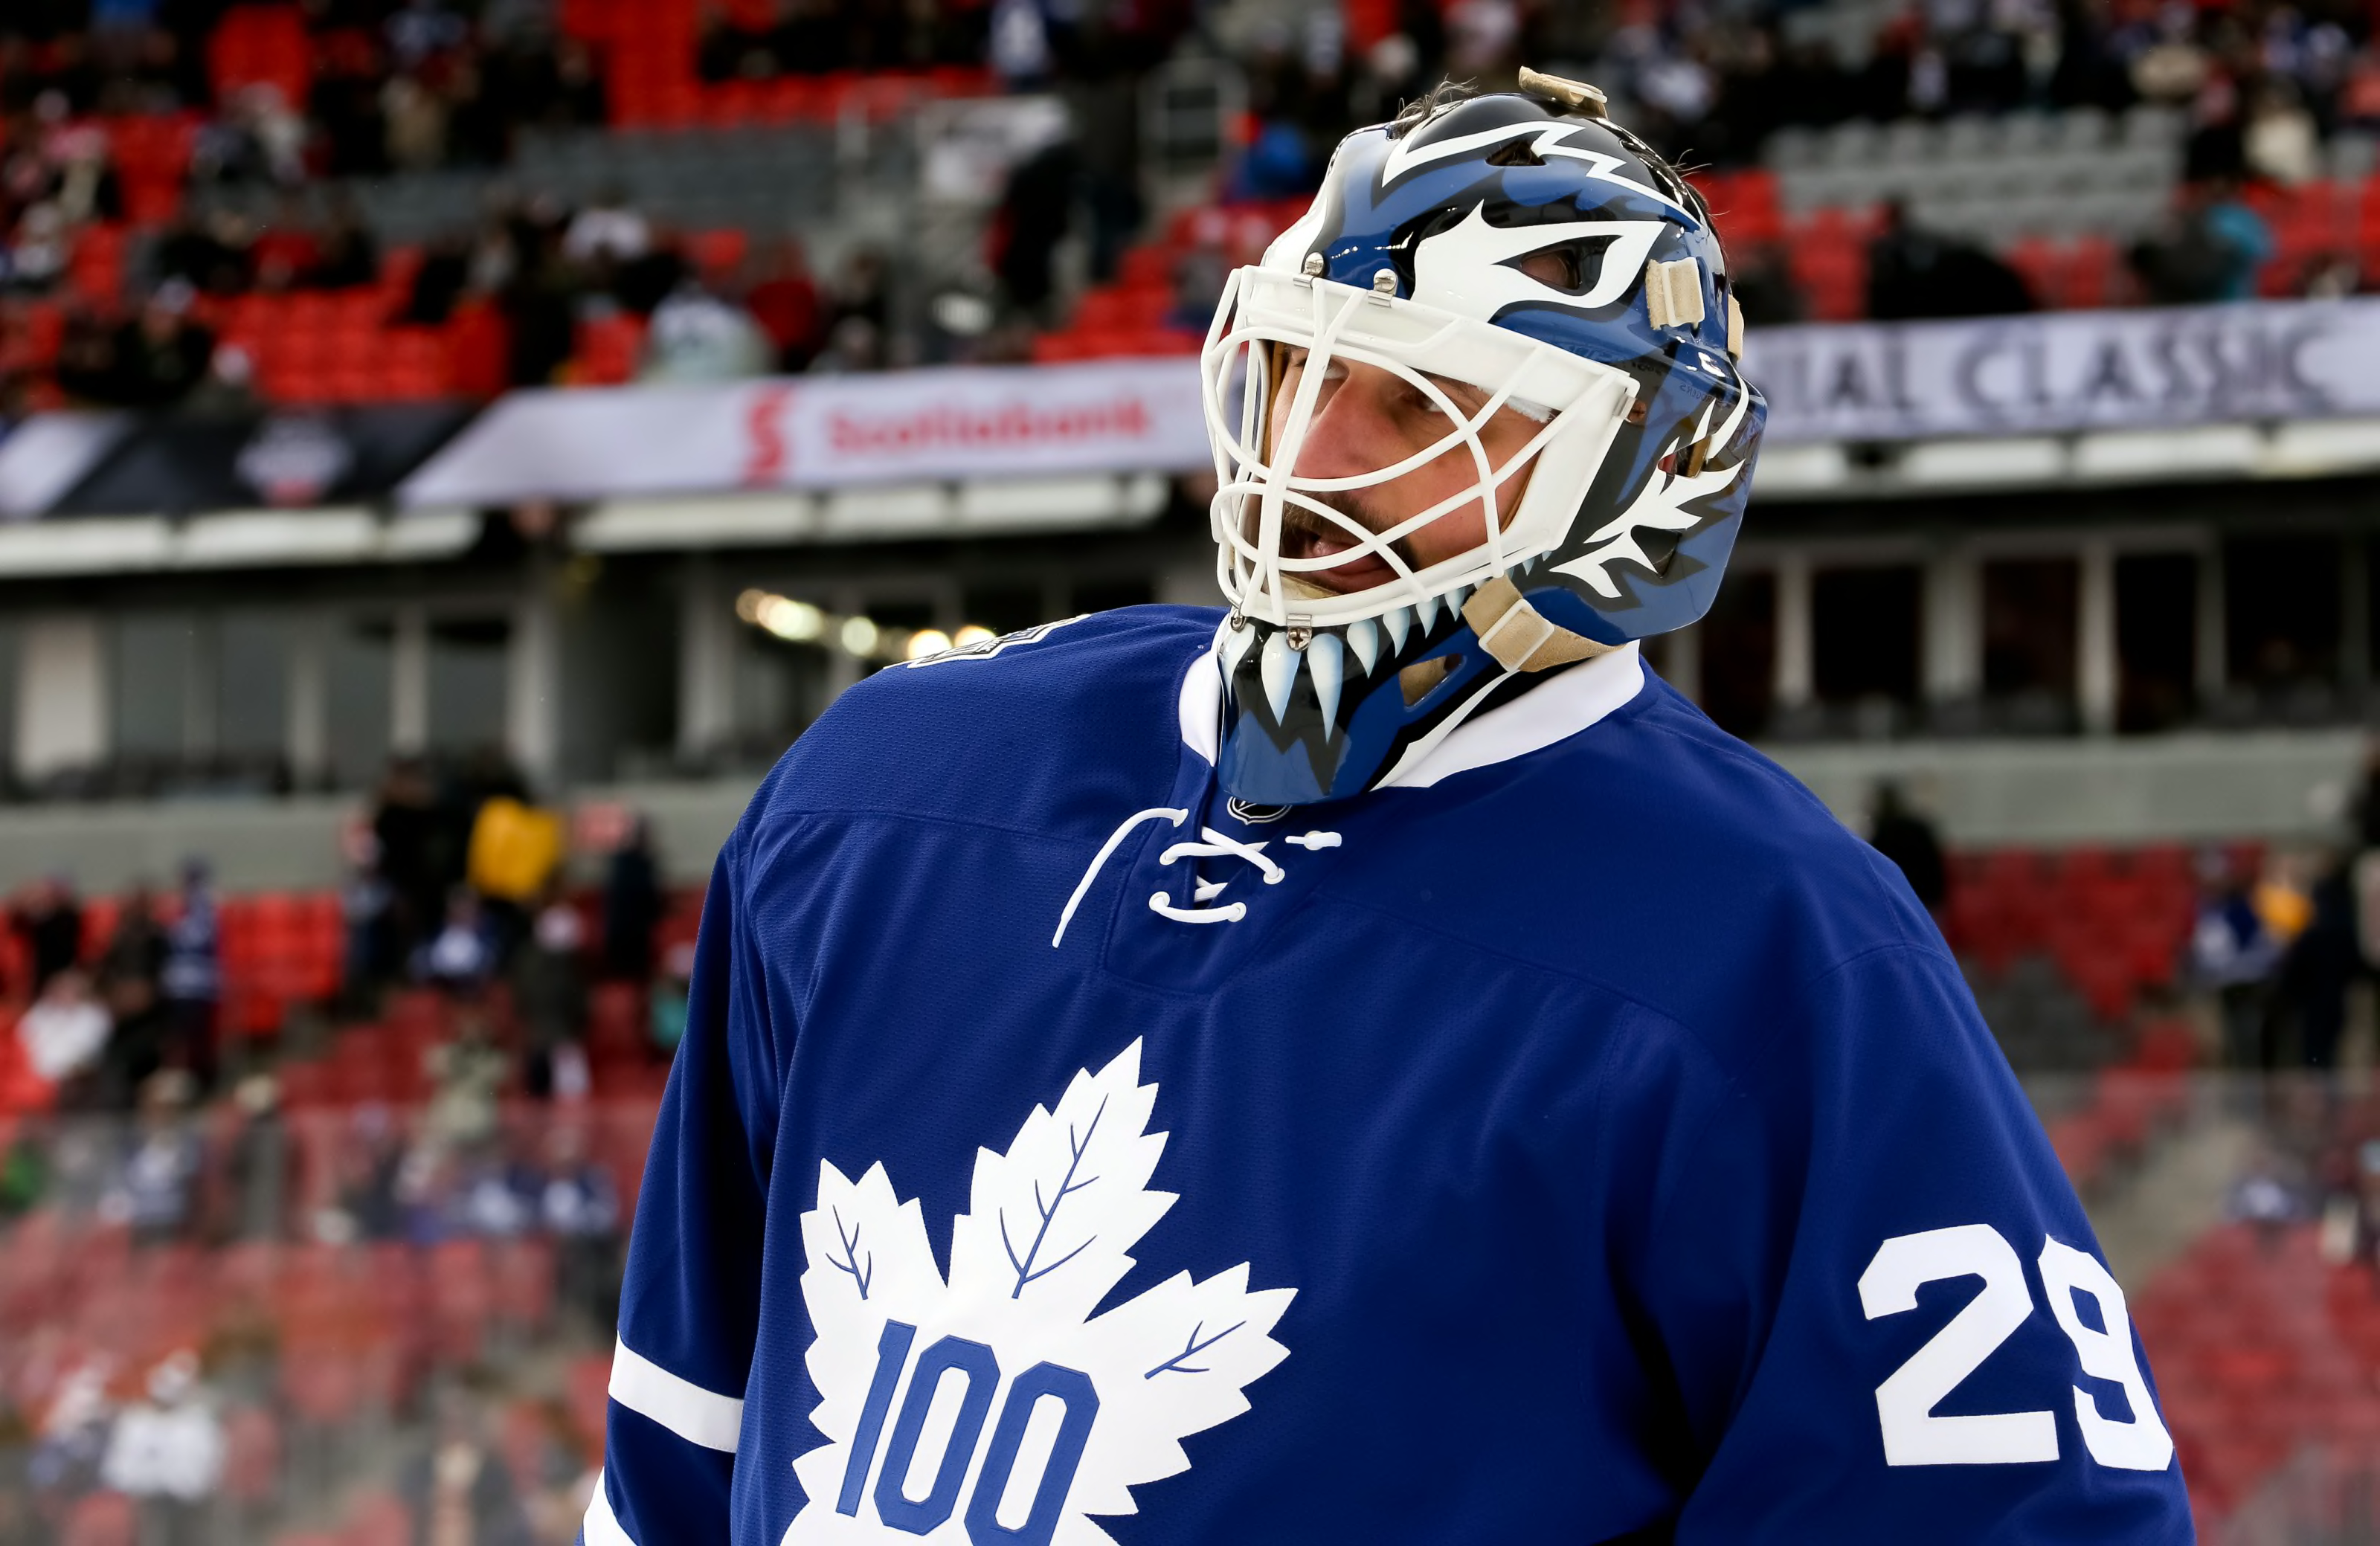 Top 5 Best Looking Toronto Maple Leafs Goalie Masks of All-Time